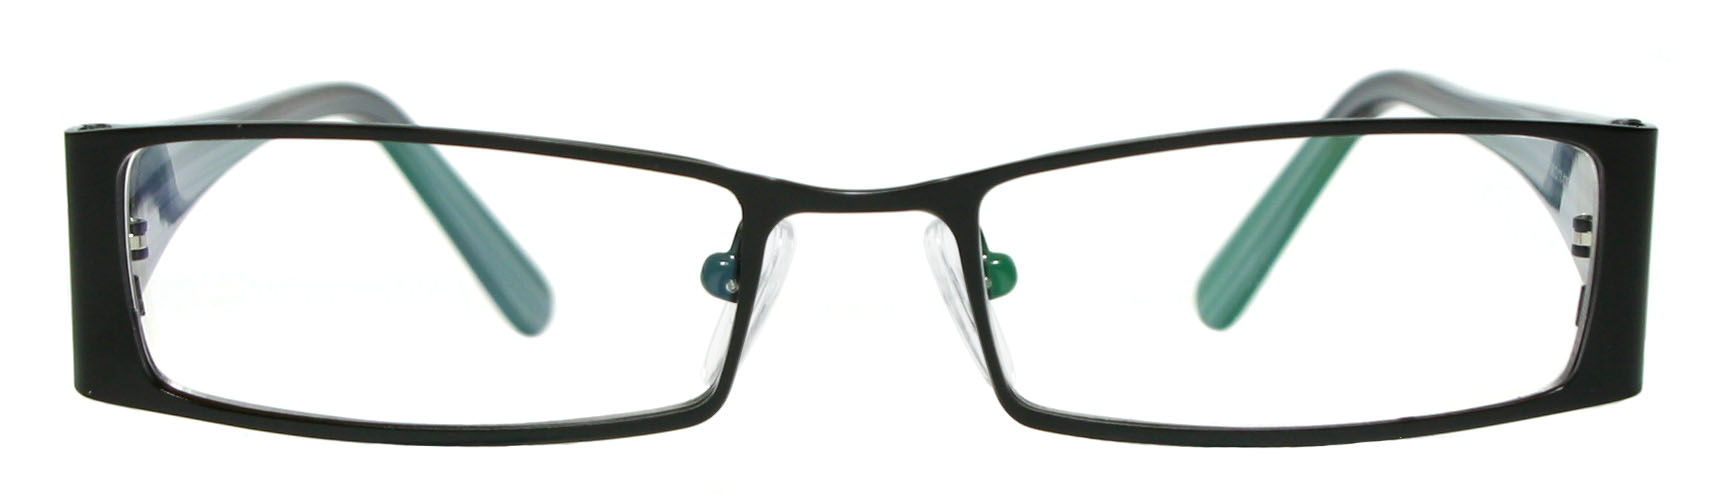 Stylish Metal Frame With Wide Acetate Temples Small Size Choice